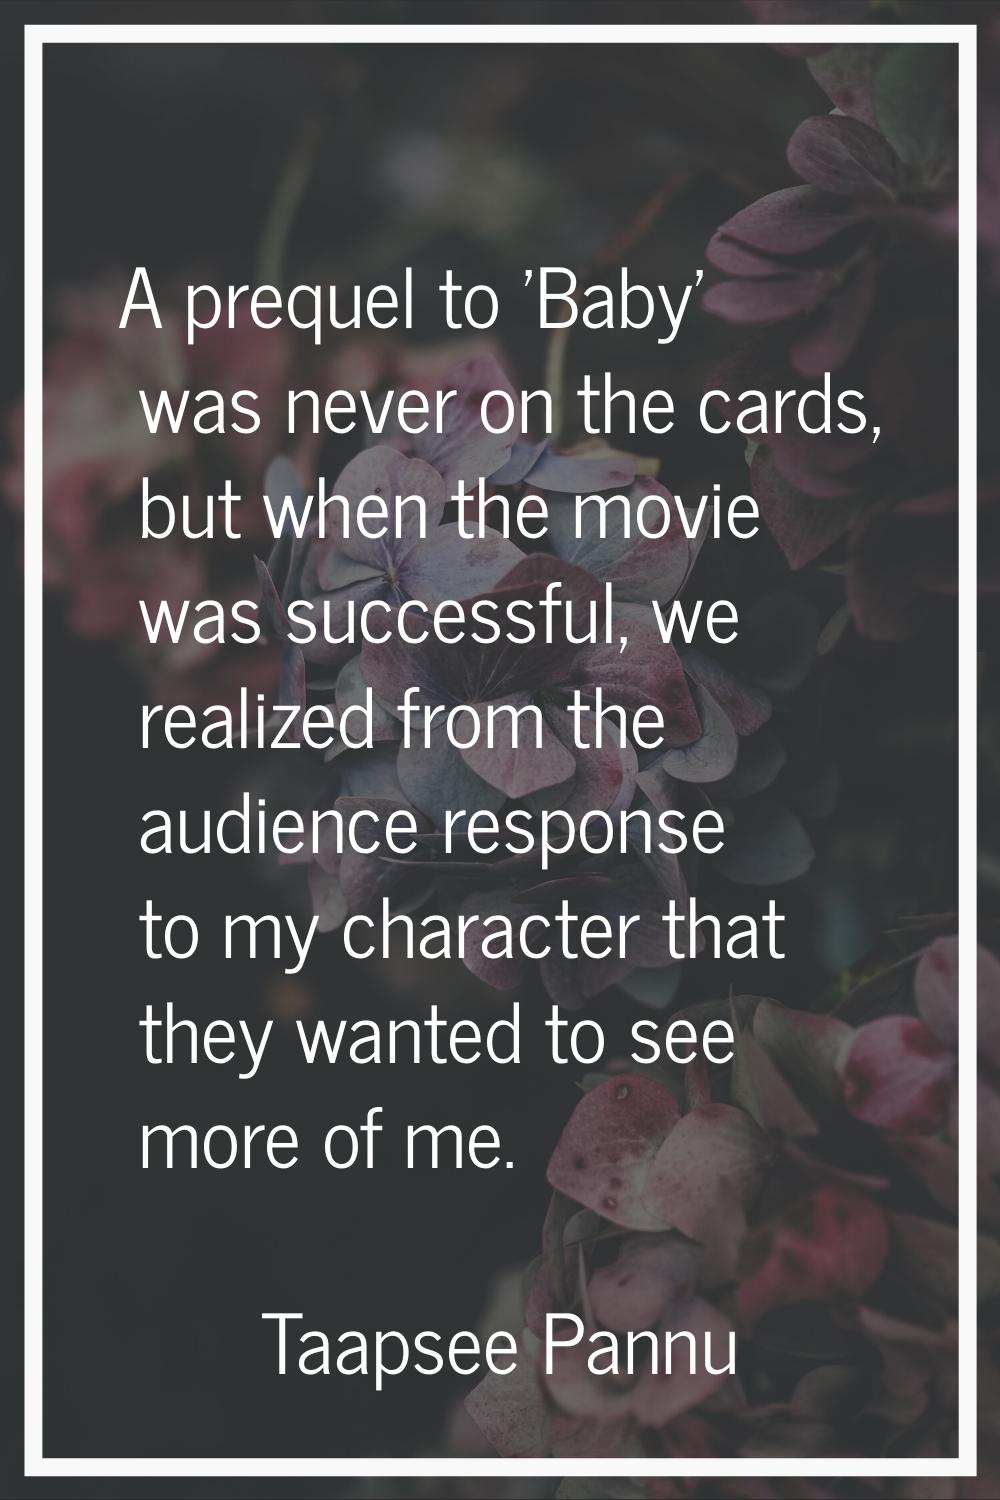 A prequel to 'Baby' was never on the cards, but when the movie was successful, we realized from the